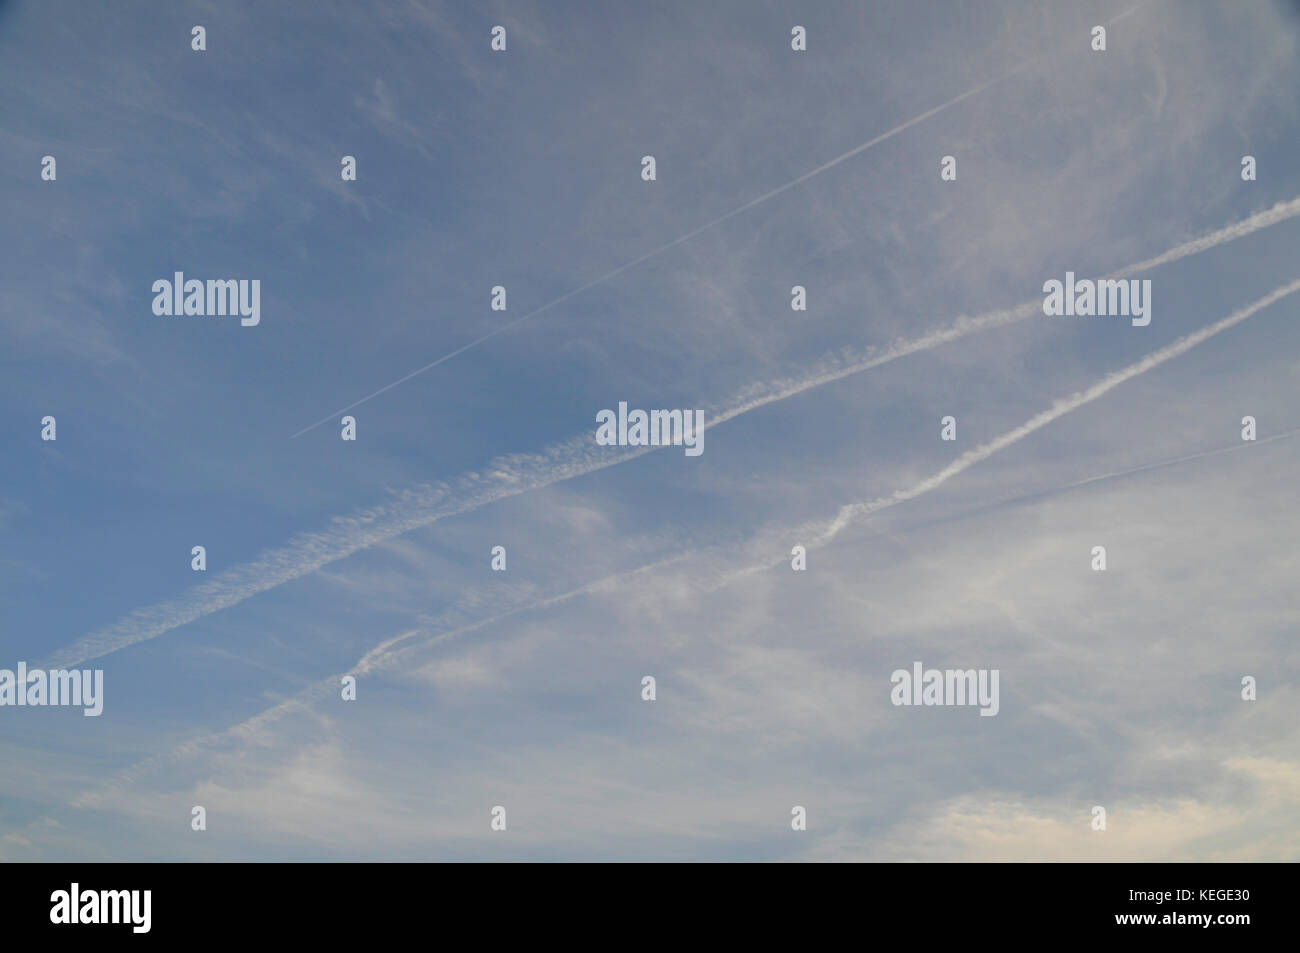 Airplane vapor trails crossing in the sky Stock Photo